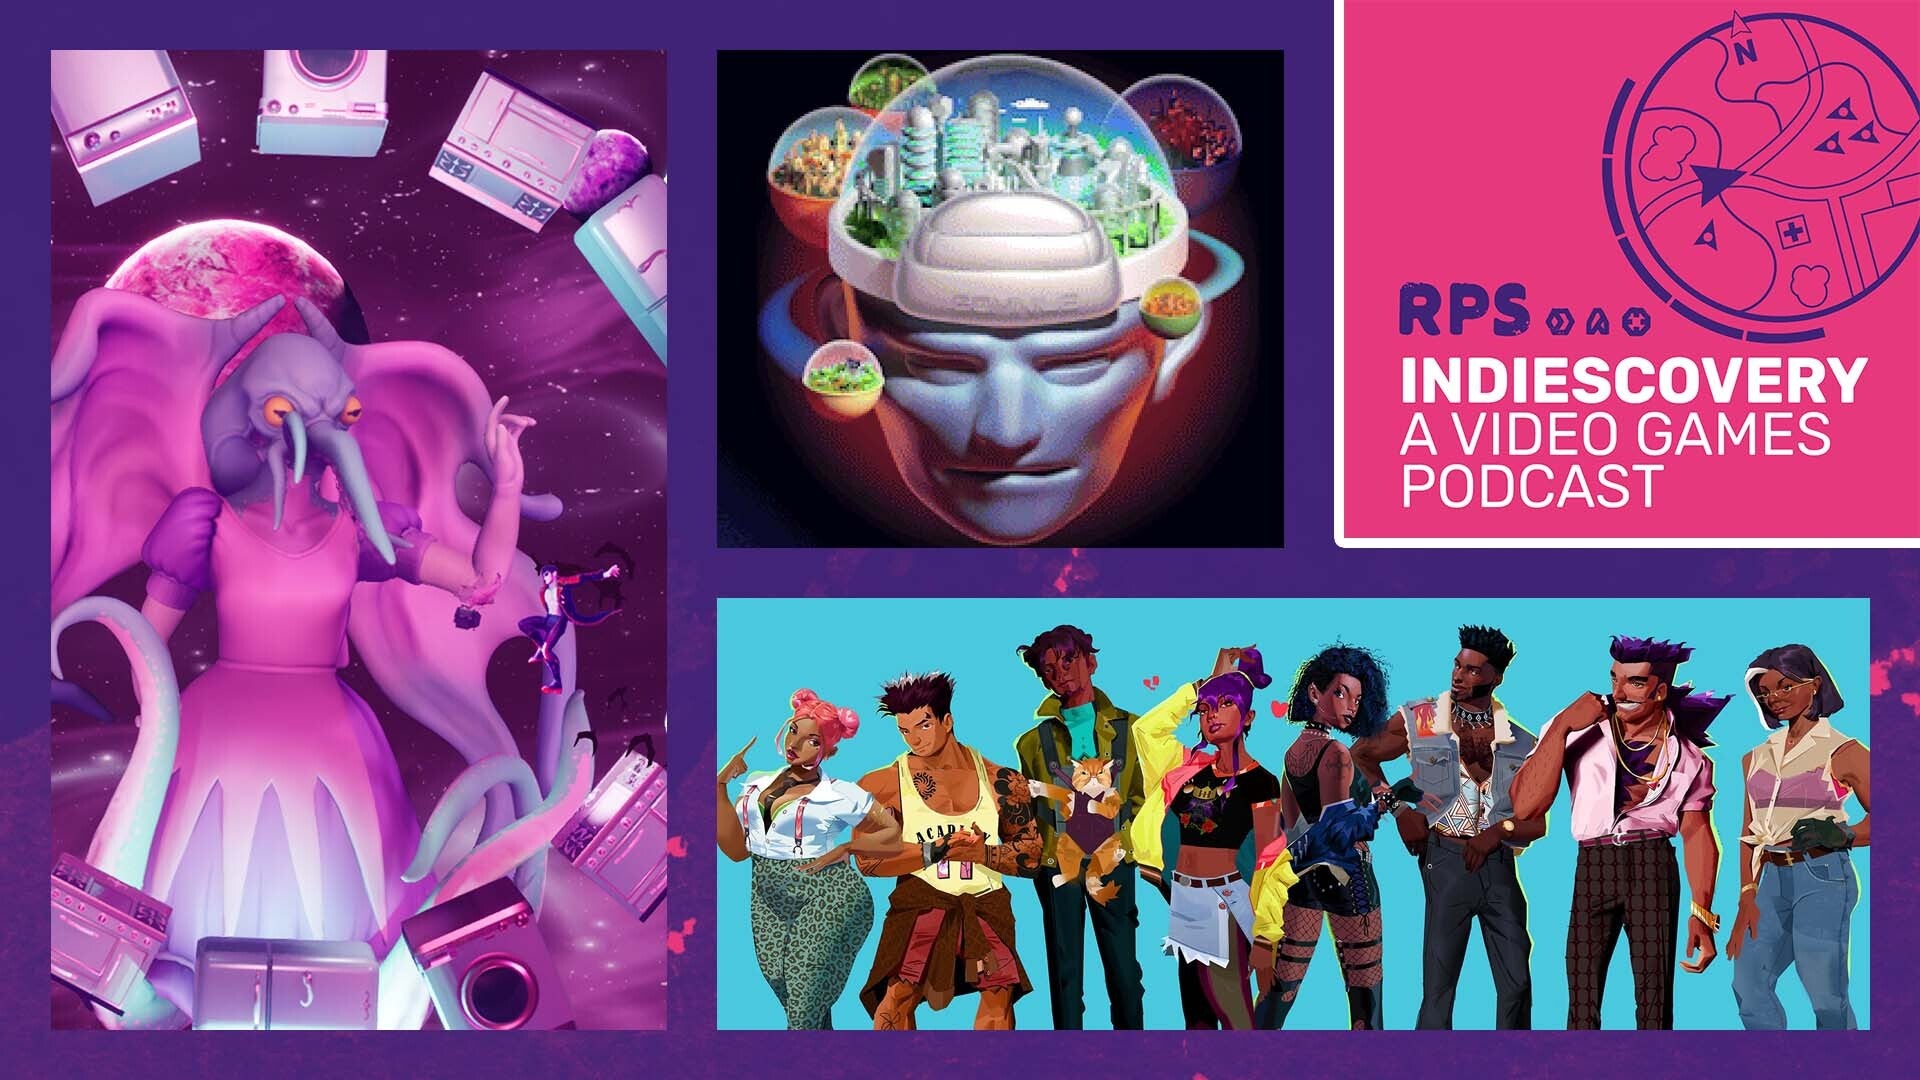 Indiescovery Episode 2: Our most anticipated indie games for
2023